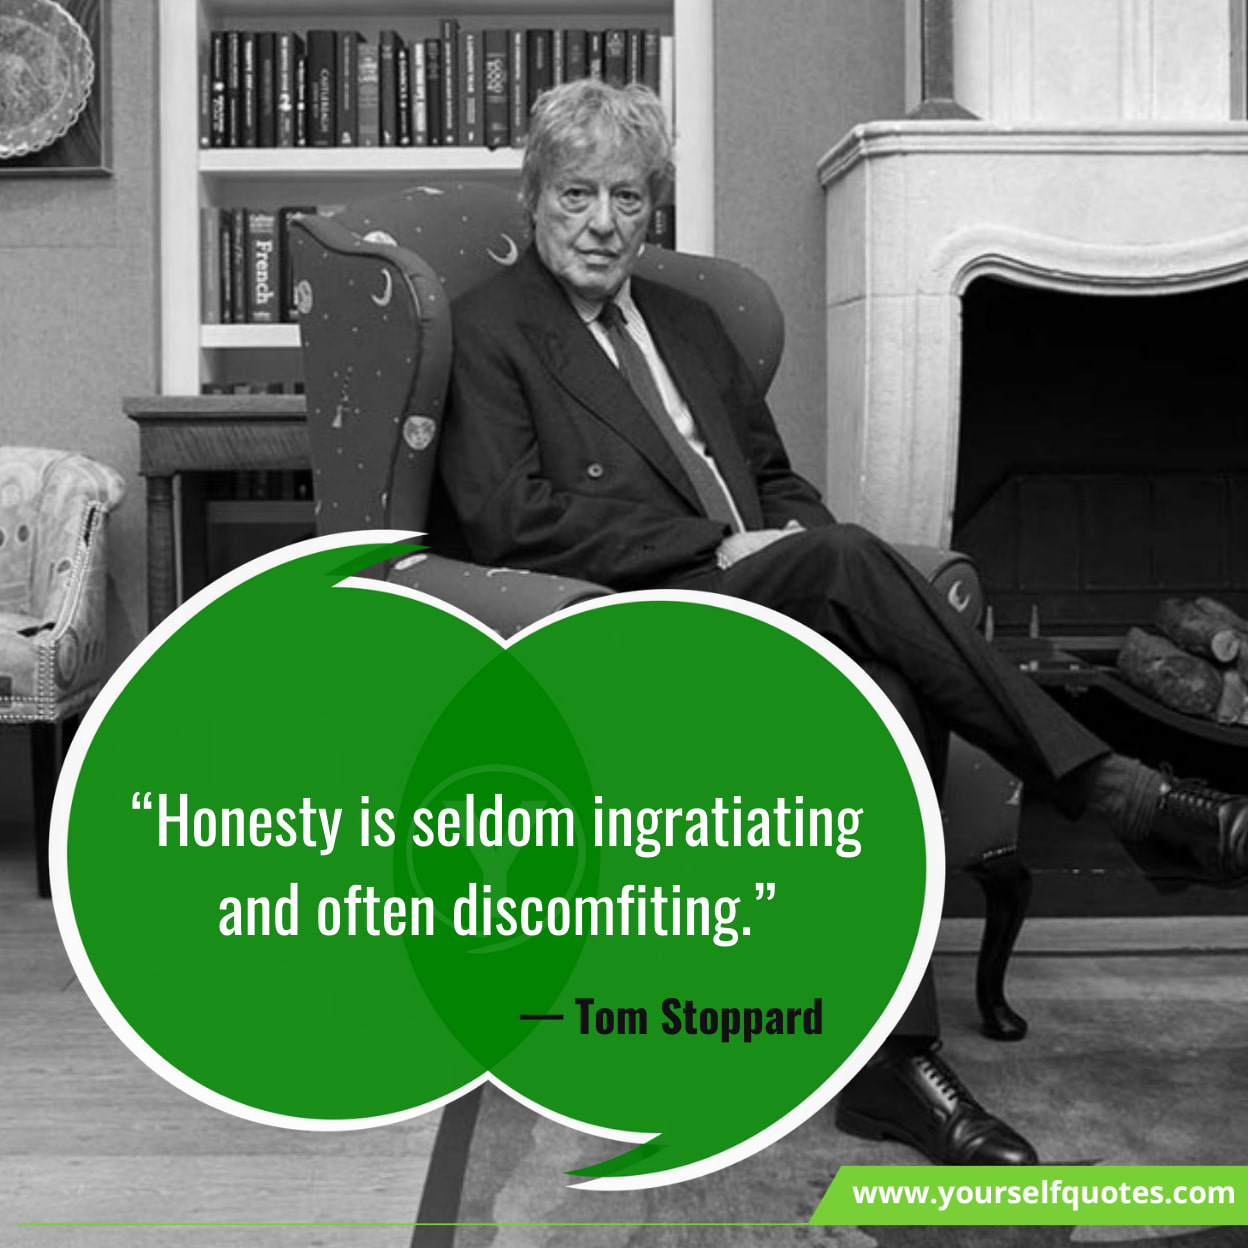 Best Famous Quotes On Honesty